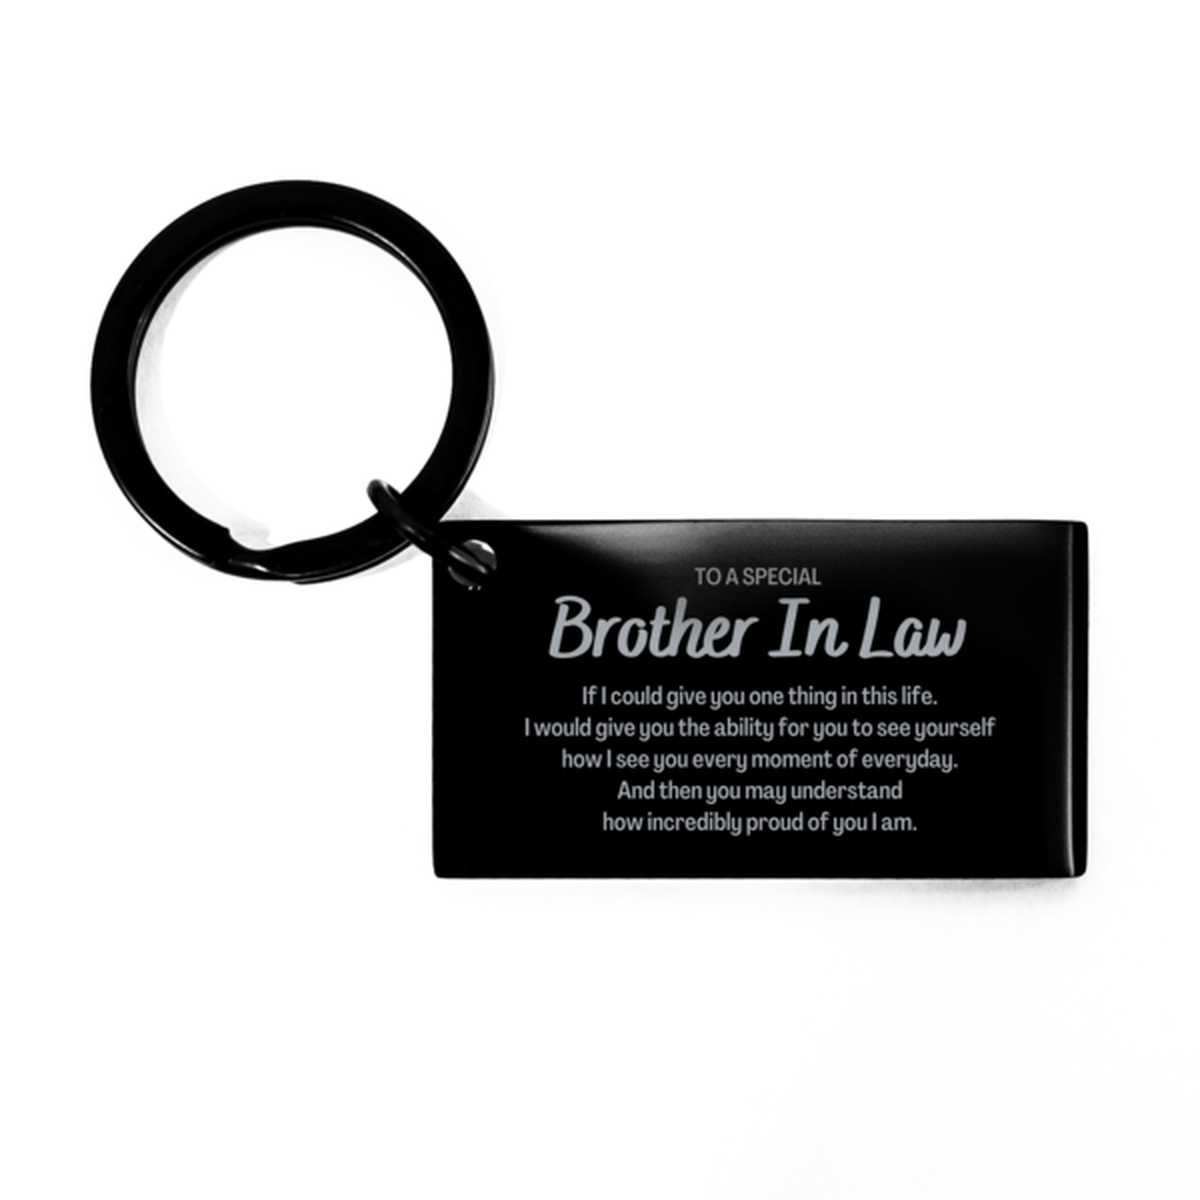 To My Brother In Law Keychain, Gifts For Brother In Law Engraved, Inspirational Gifts for Christmas Birthday, Epic Gifts for Brother In Law To A Special Brother In Law how incredibly proud of you I am